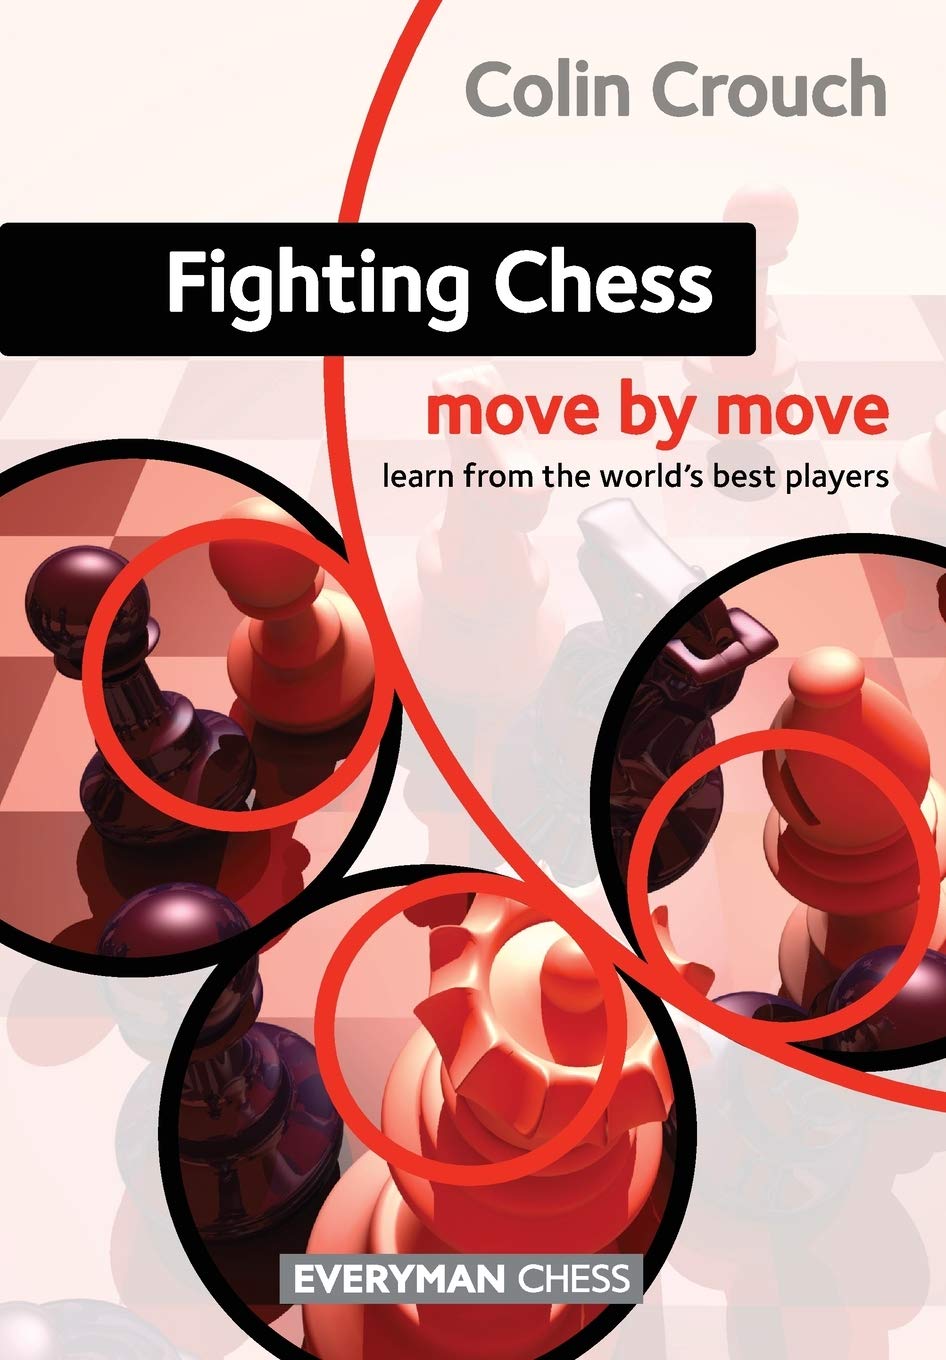 Fighting Chess Move by Move